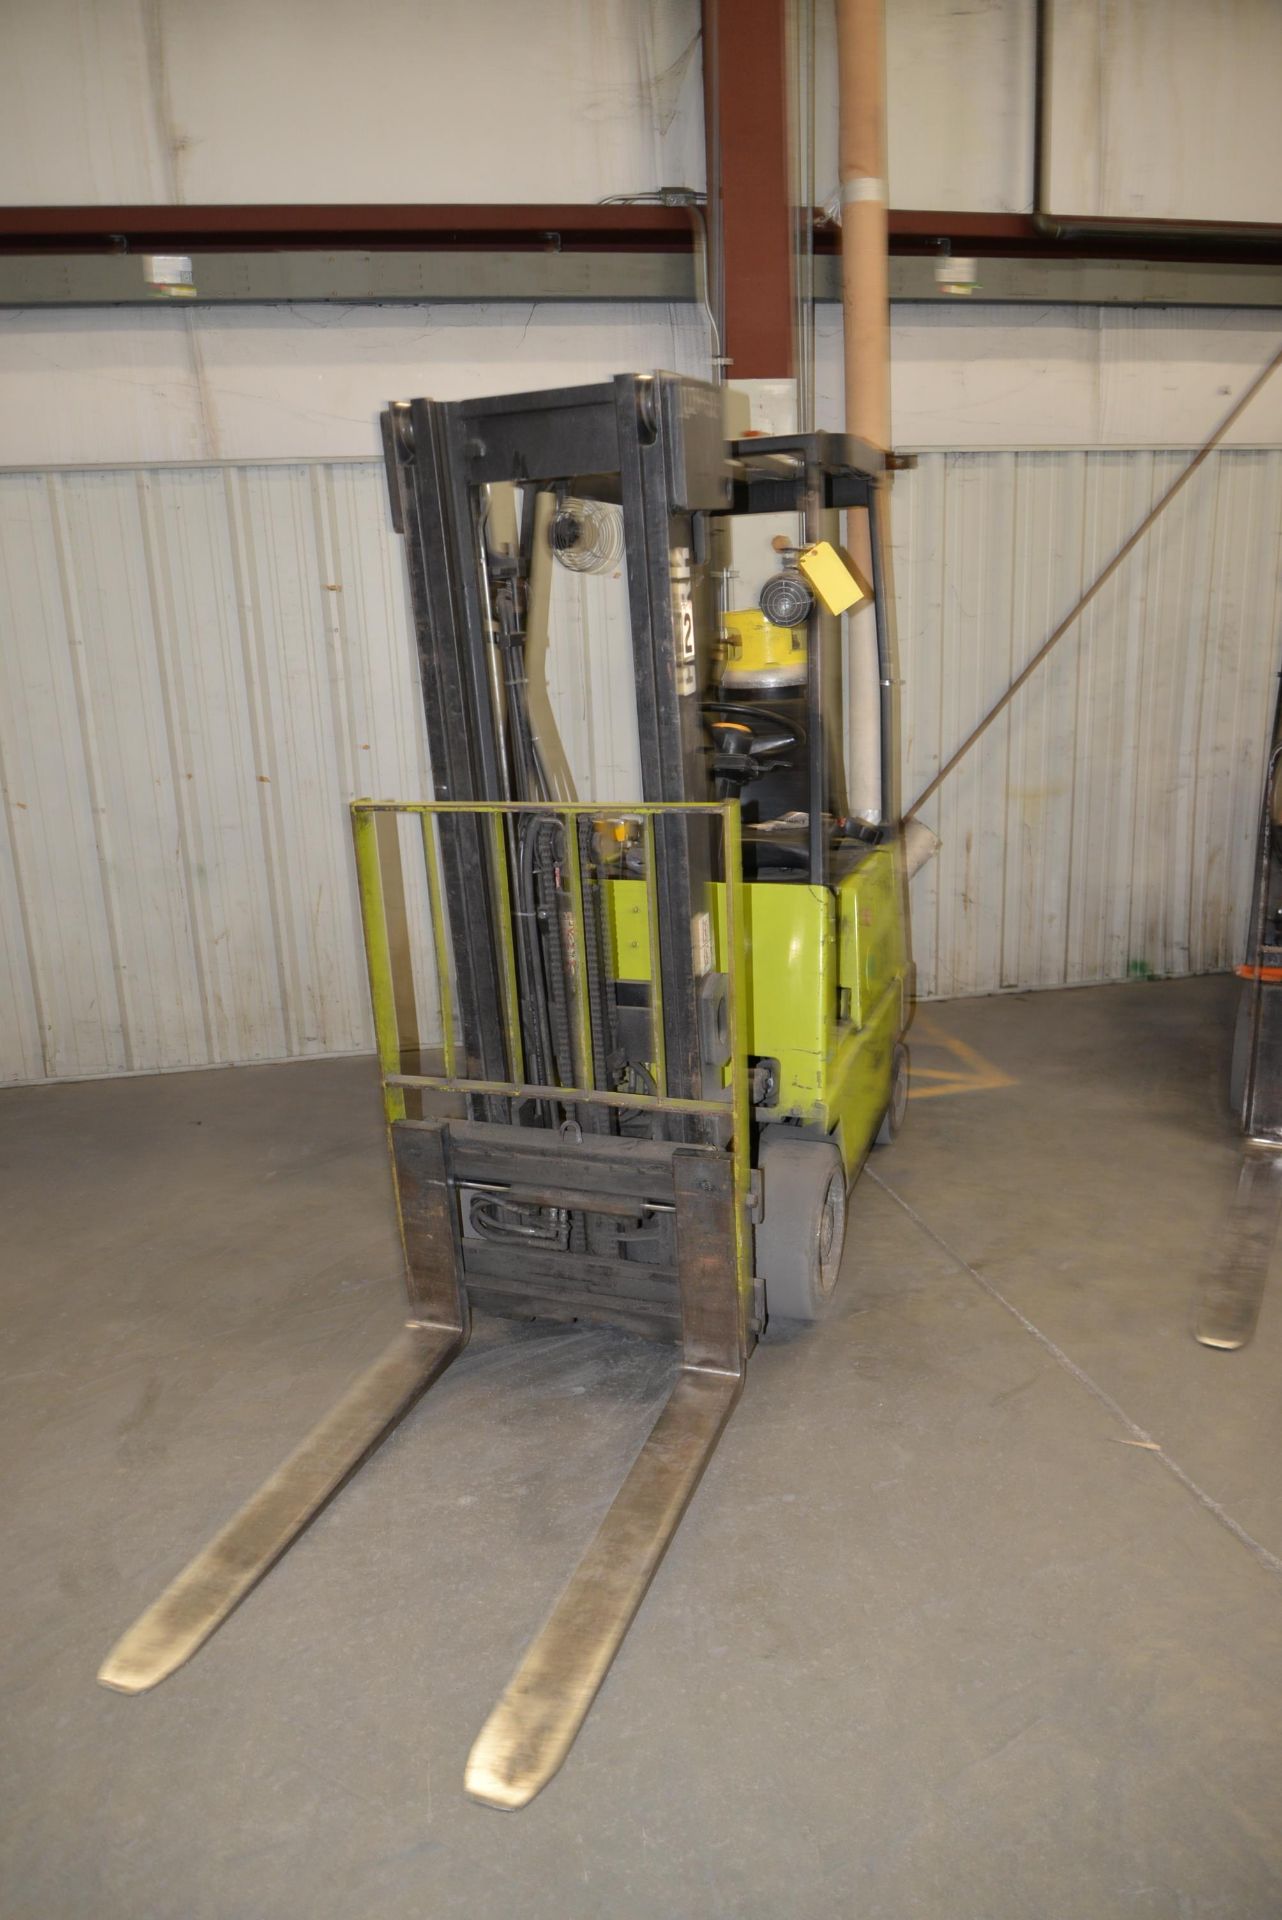 CLARK 2,000 LB. FORKLIFT; MODEL GC5-12, 2-STAGE MAST, SIDE SHIFT, 128'' MAX. HEIGHT, 9,290 HOURS, - Image 4 of 4